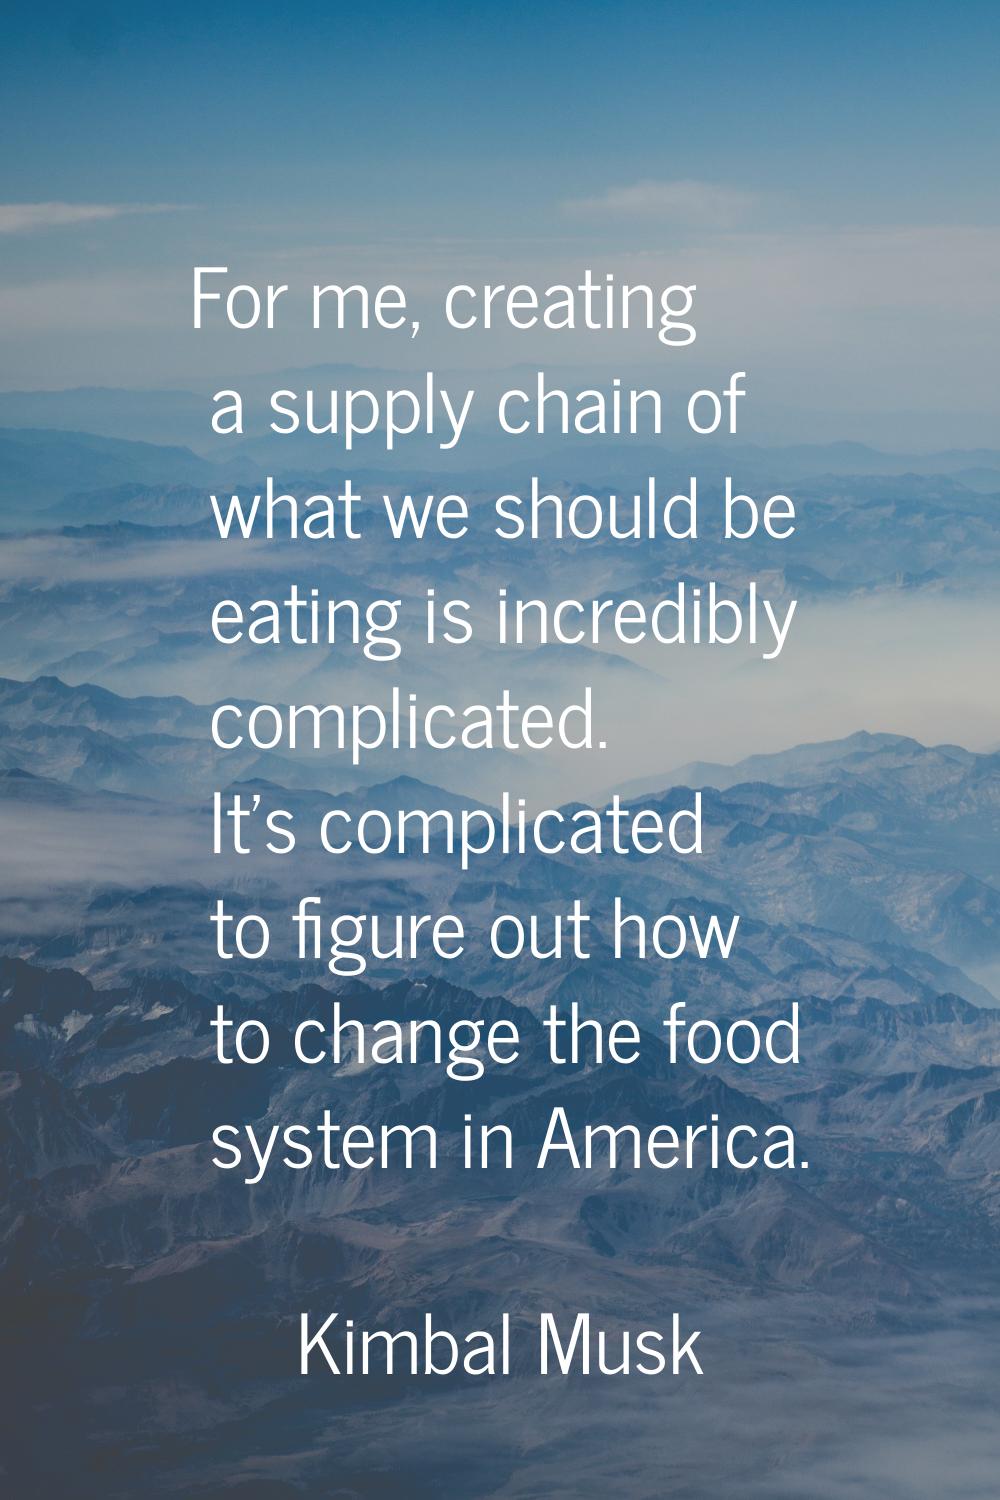 For me, creating a supply chain of what we should be eating is incredibly complicated. It's complic